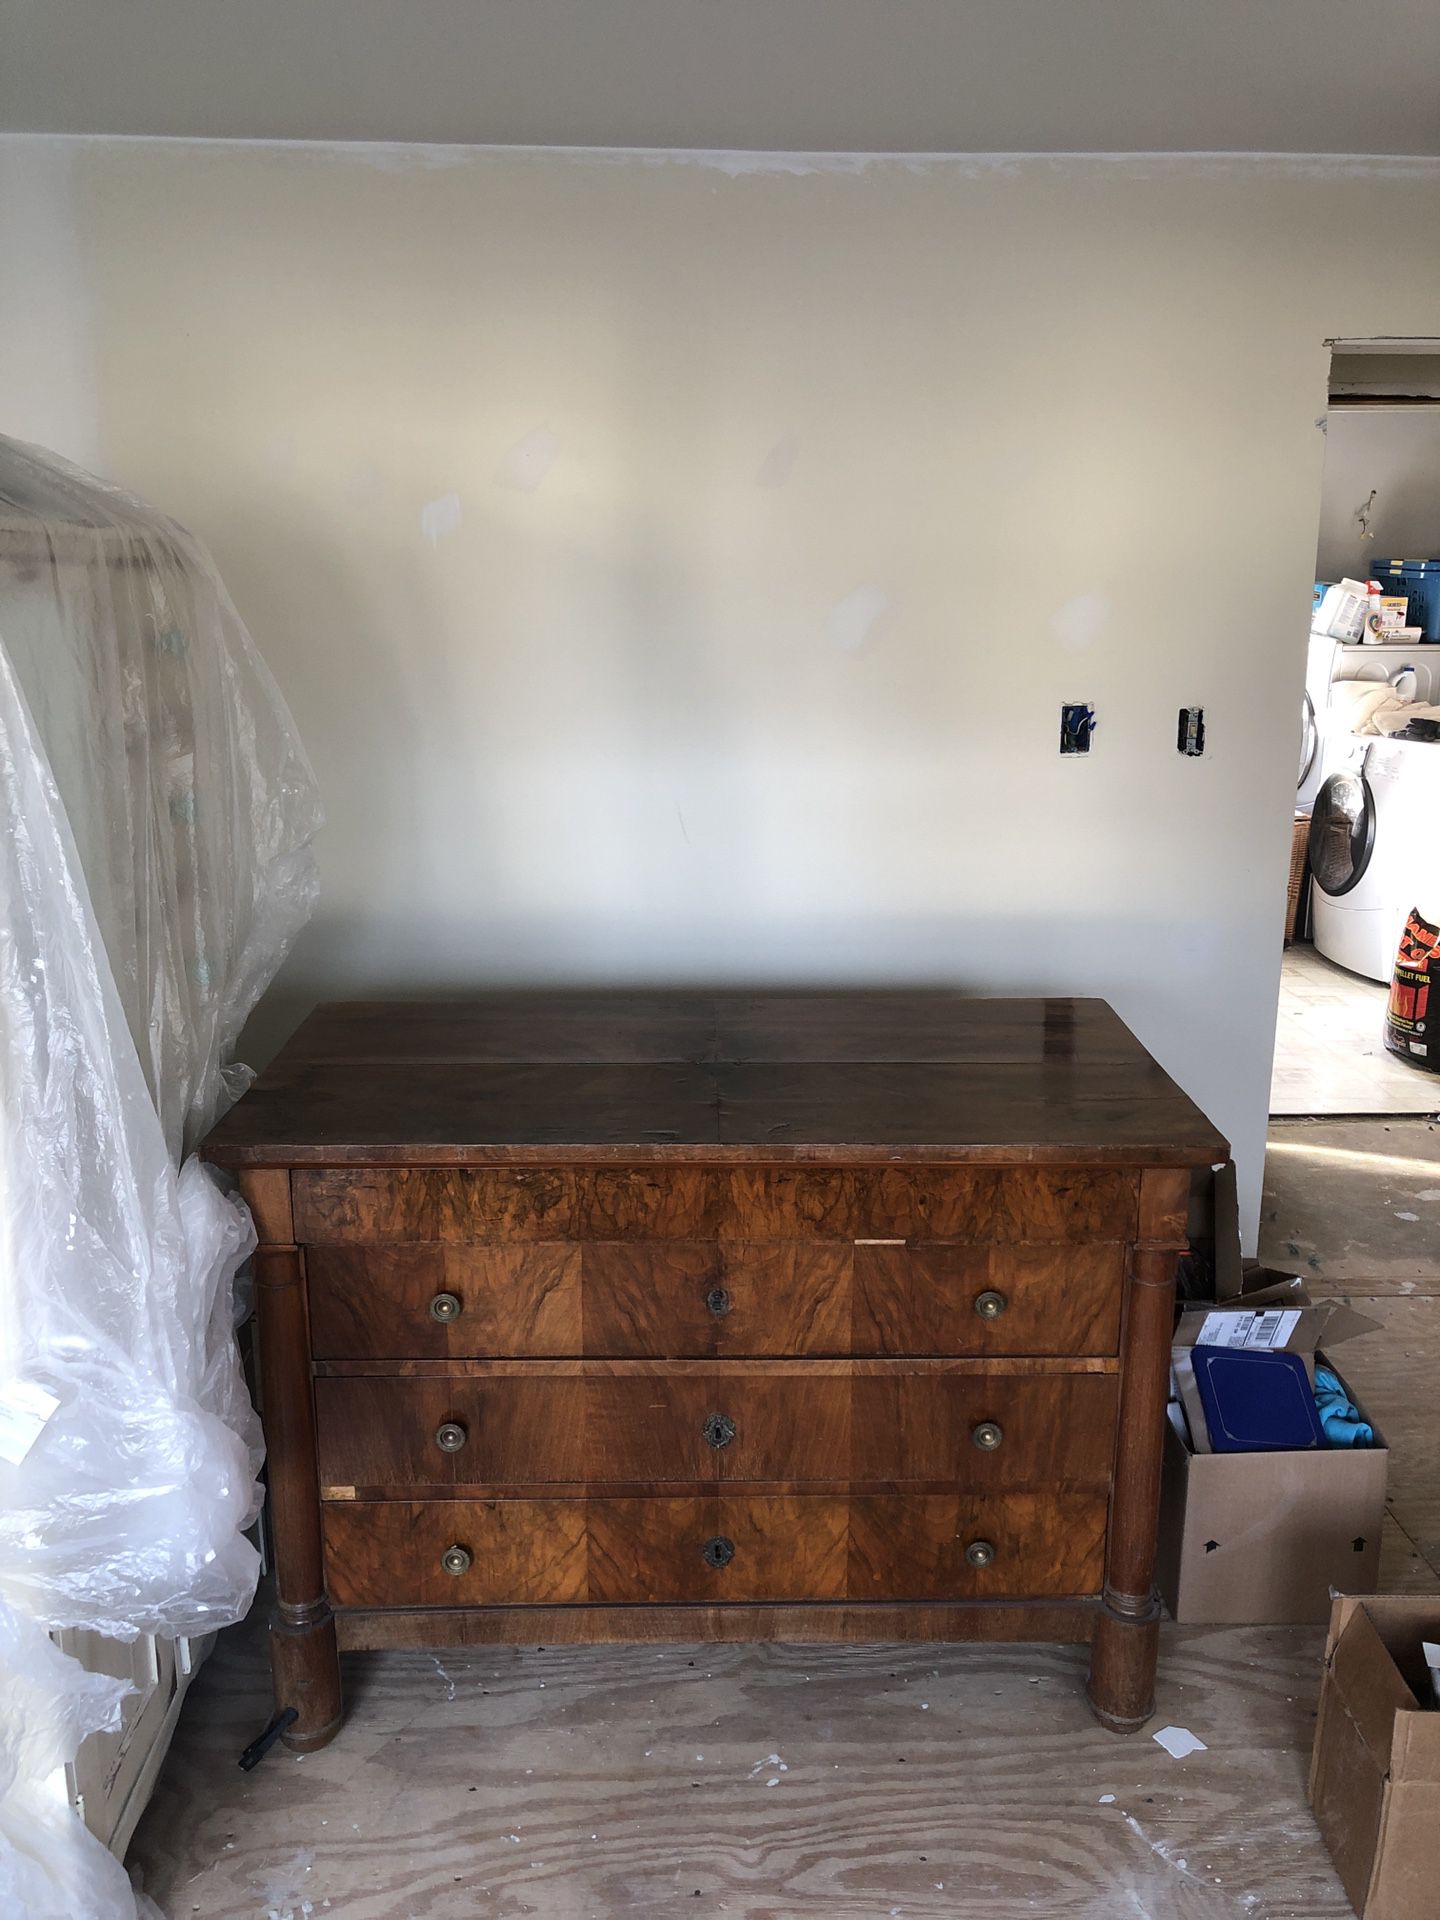 Antique dresser, formally owned by Evander Holyfield